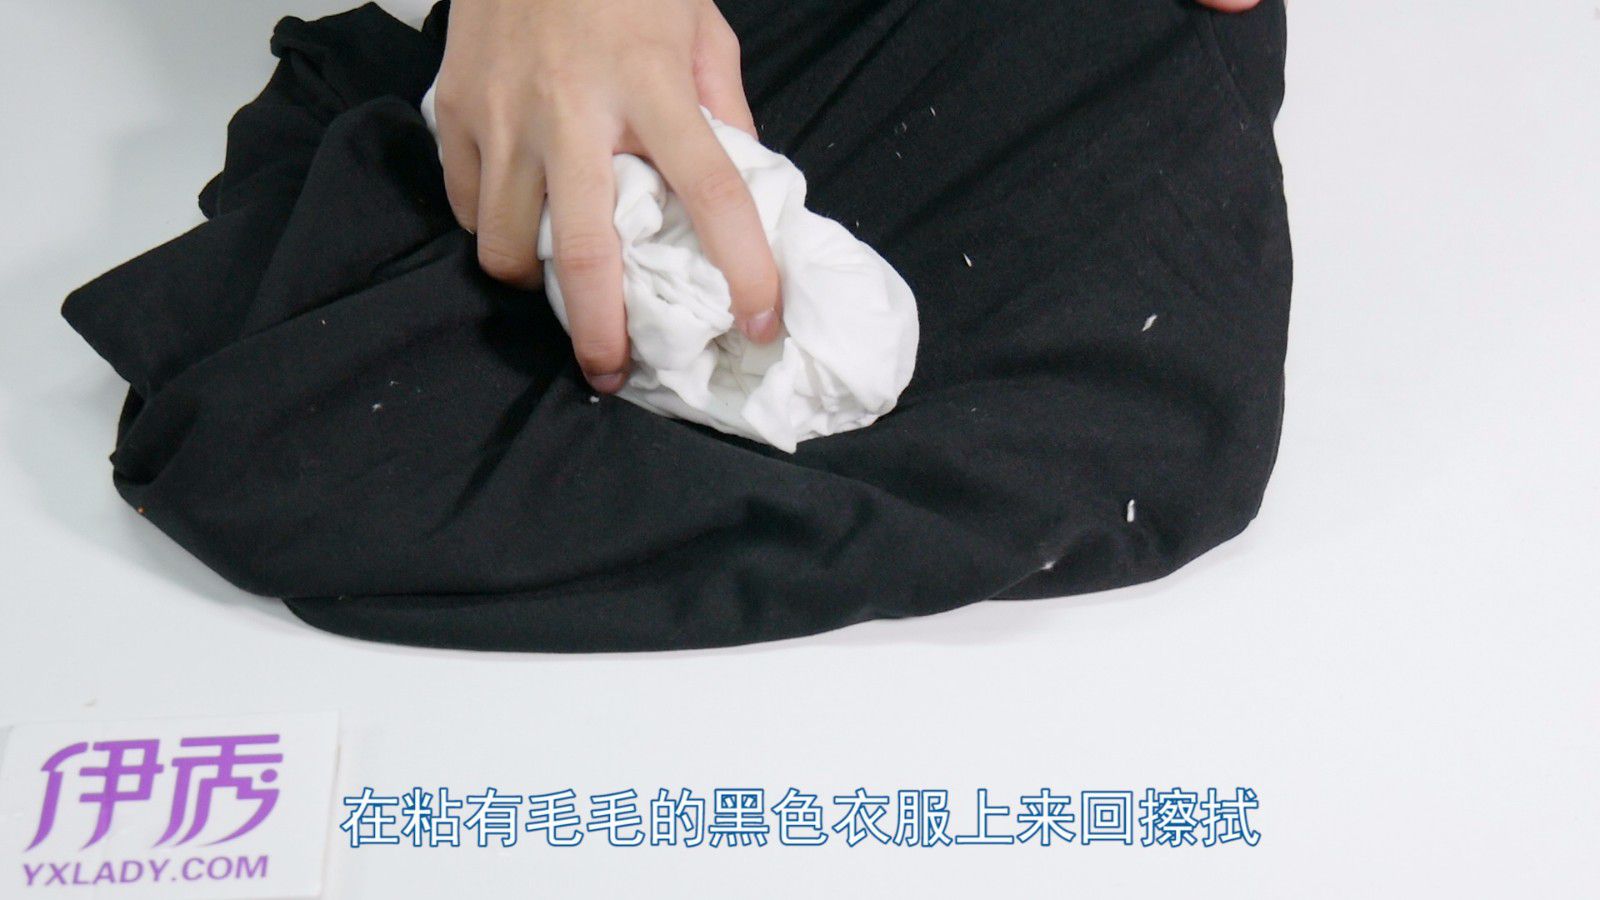 How to Remove Stains From Clothes in a Natural Way ? | Mr. Journo